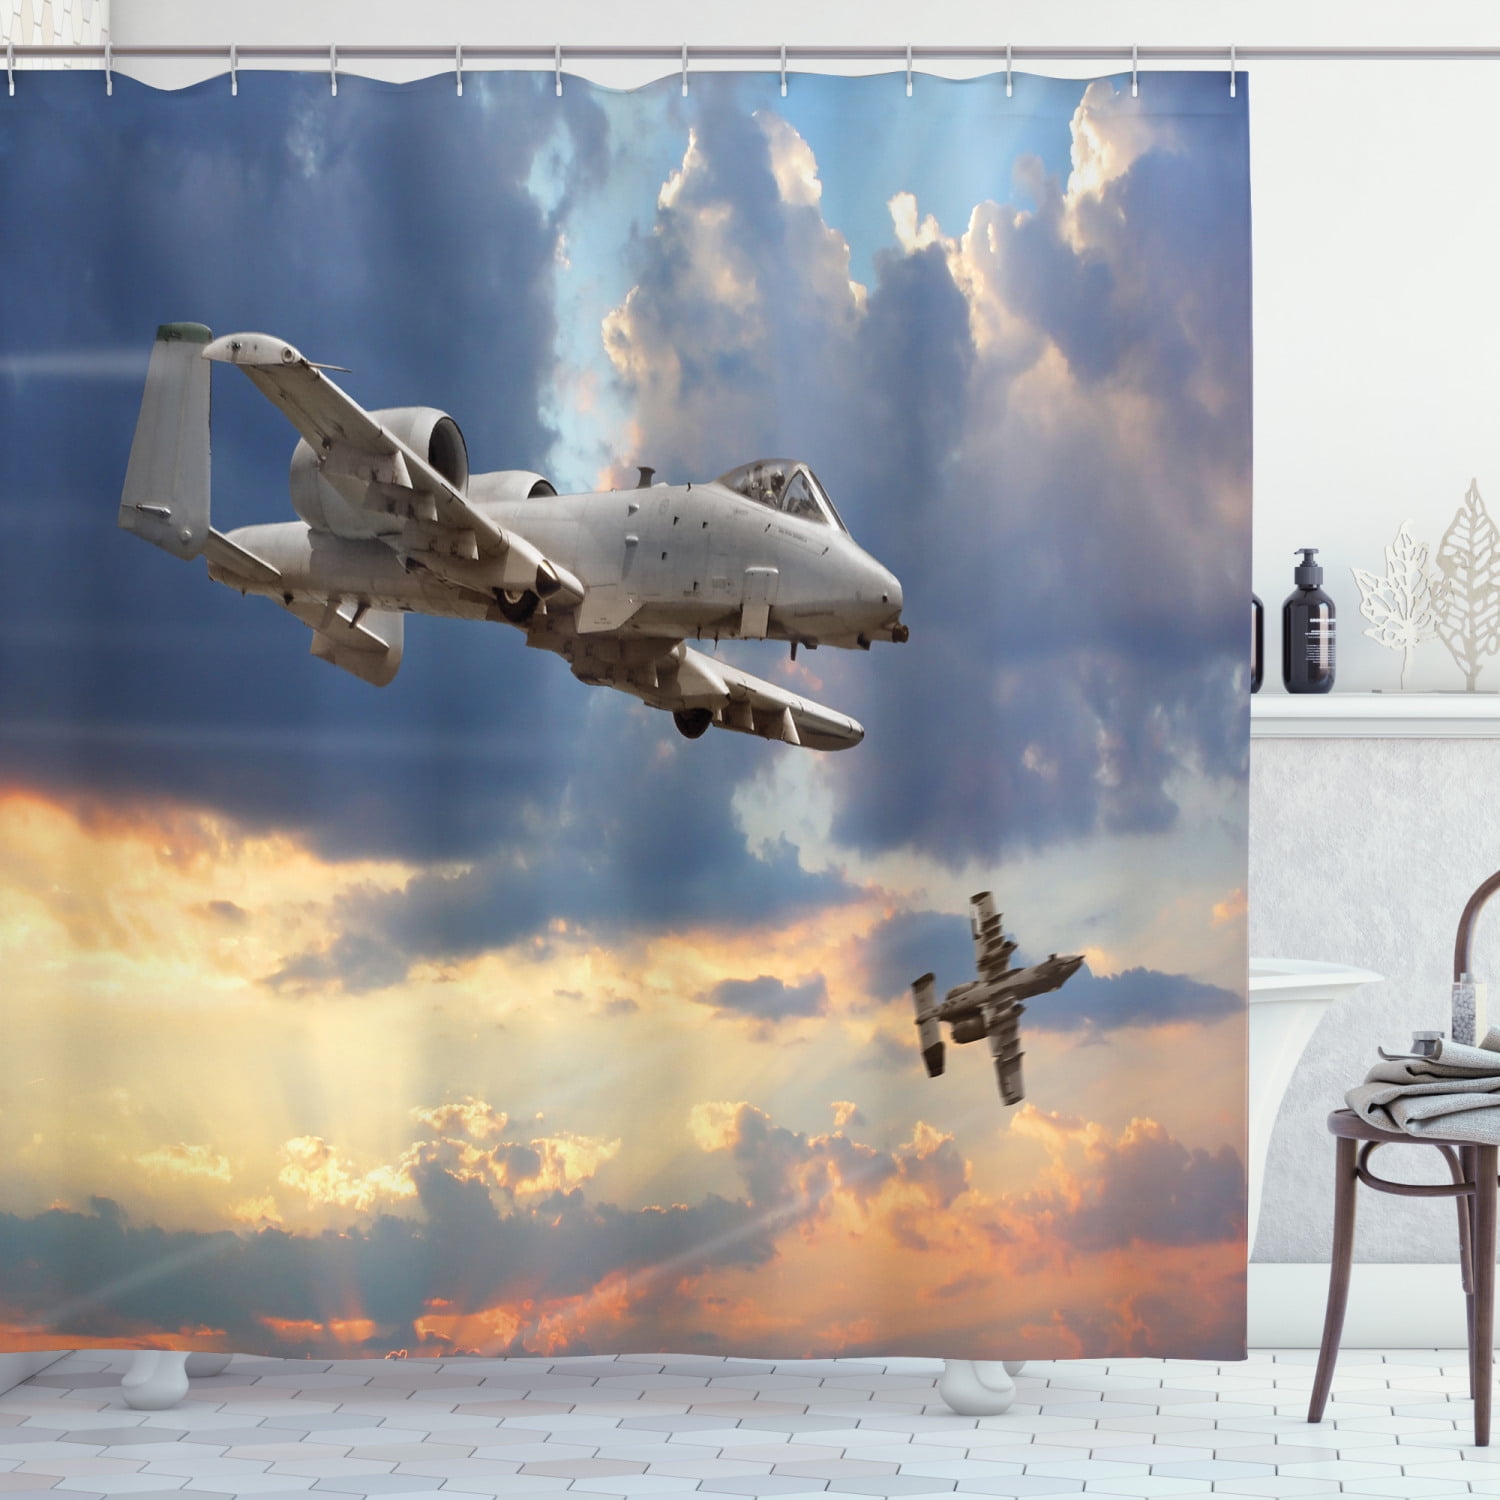 Scenery Shower Curtain Widebody Jet Air Plane Print for Bathroom 70 Inches Long 